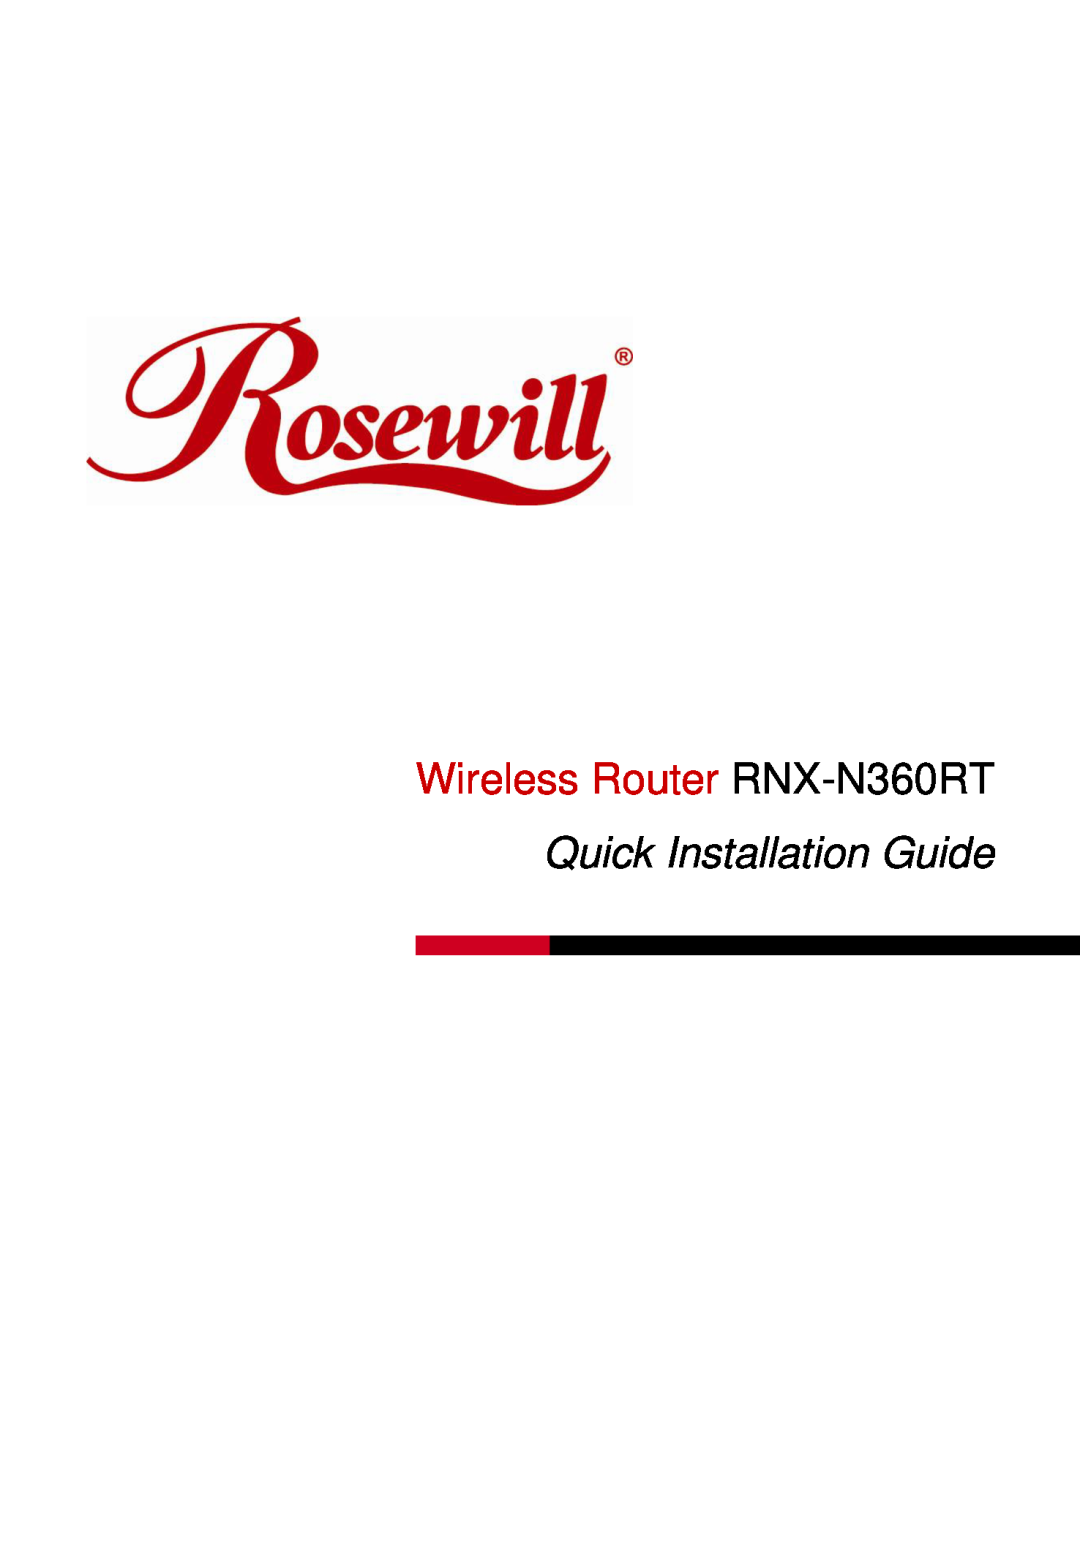 Rosewill manual Wireless Router RNX-N360RT, Quick Installation Guide 